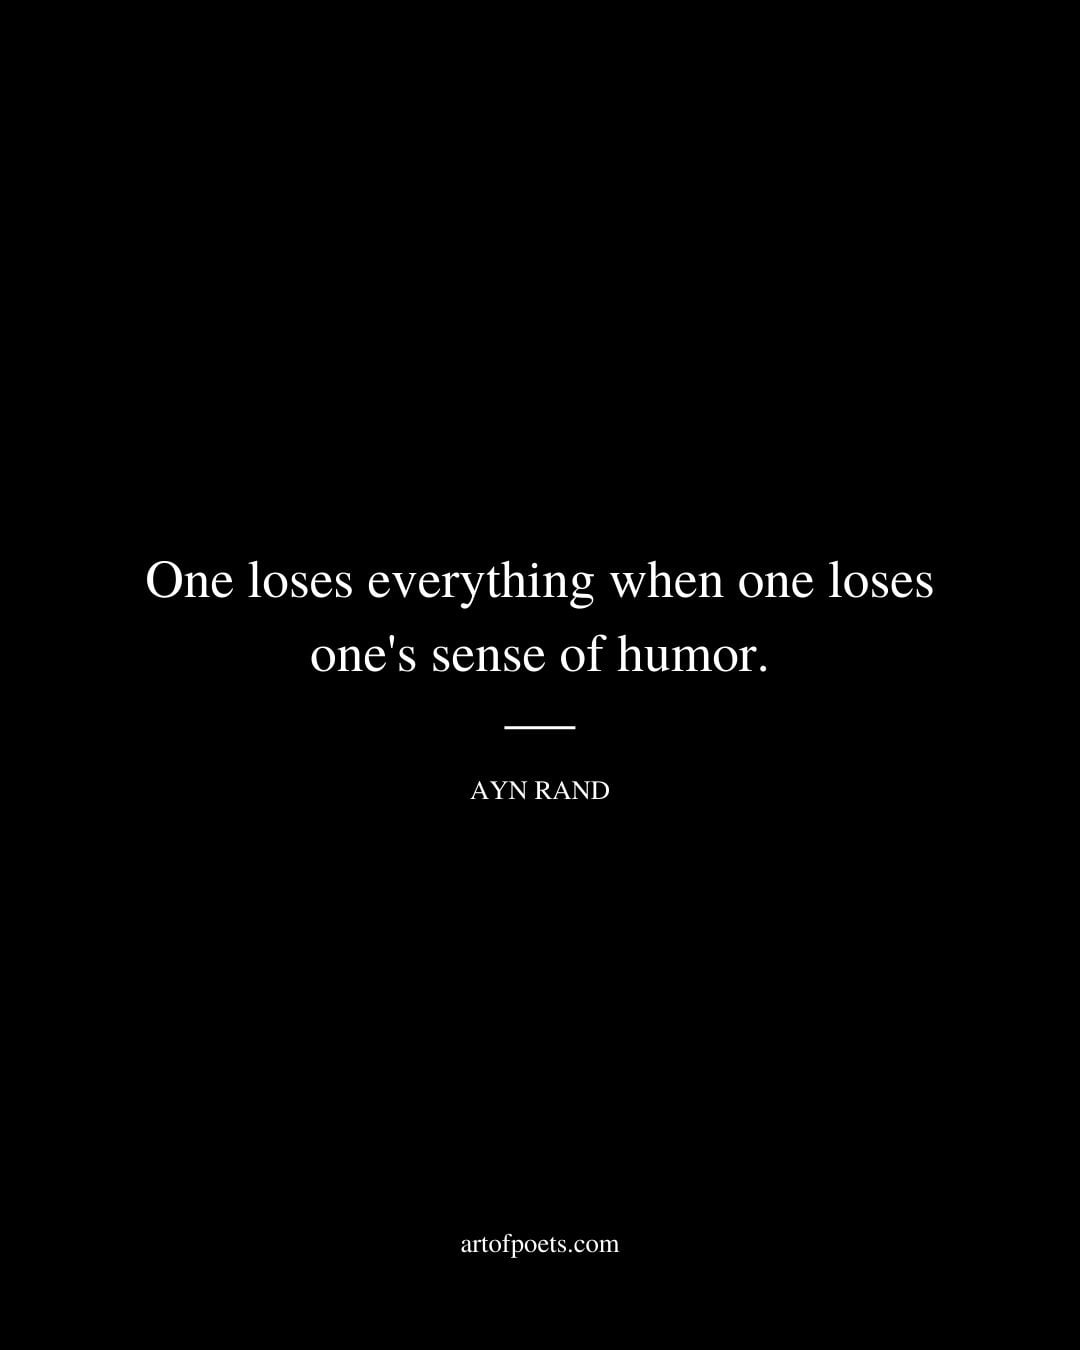 One loses everything when one loses ones sense of humor